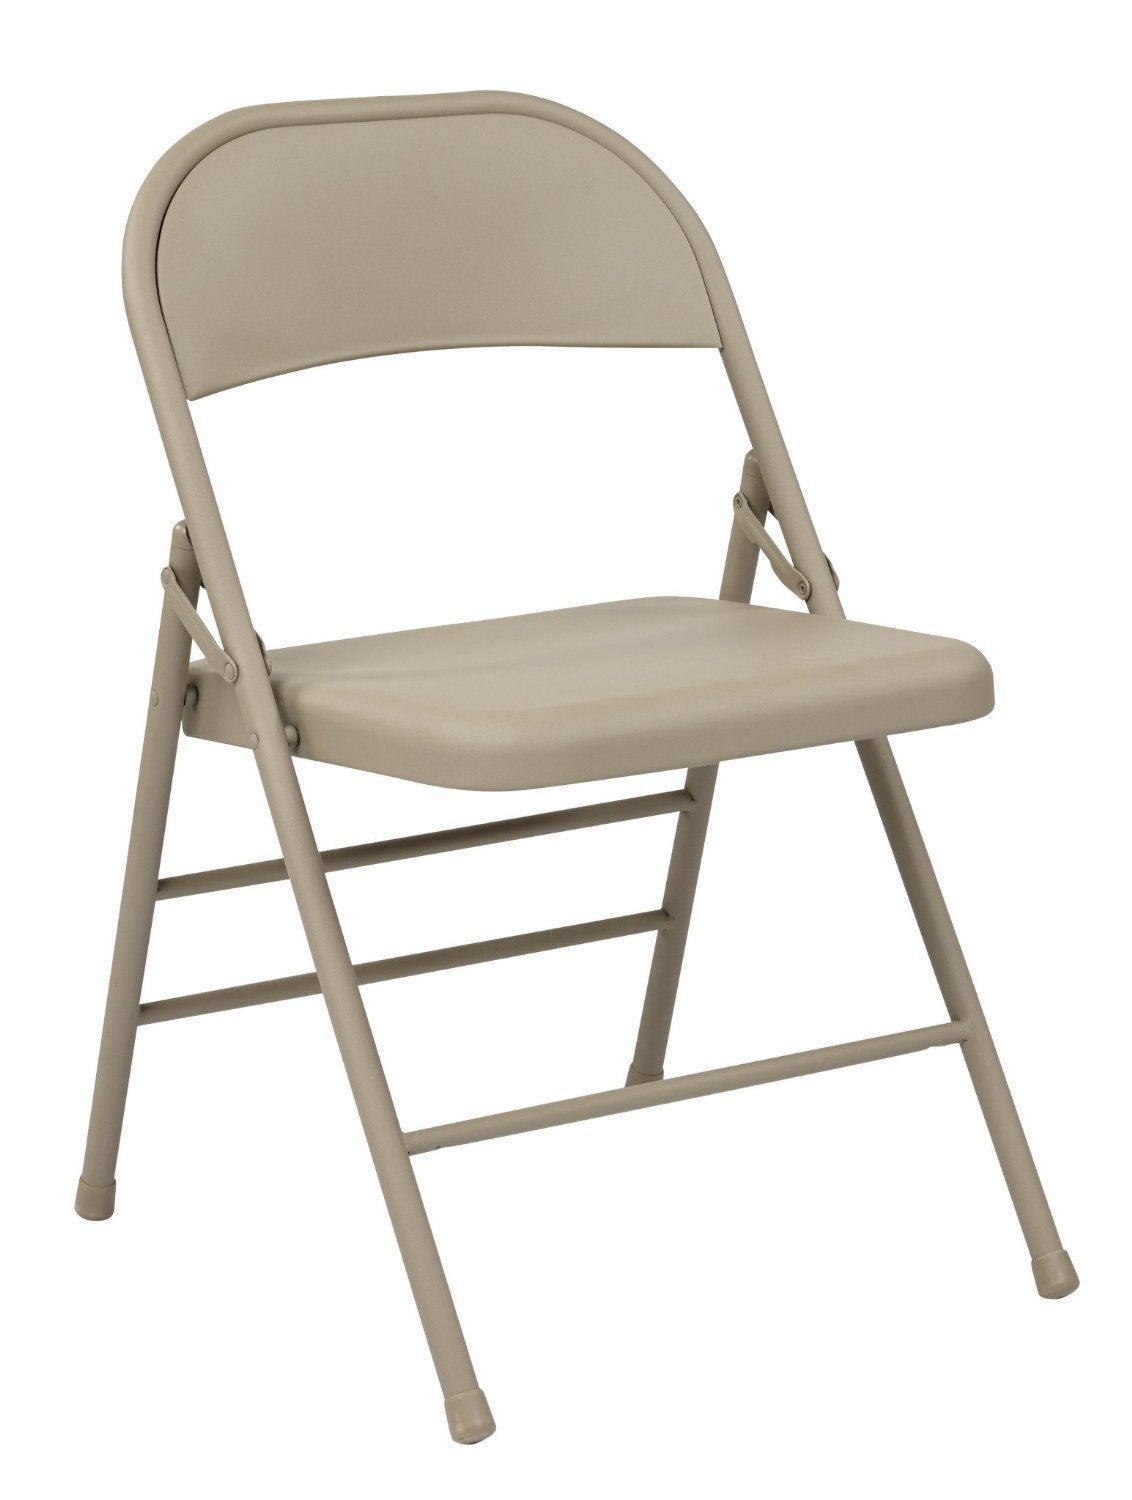 Work Smart Ff-22124m Folding Chair With Metal Seat And Back